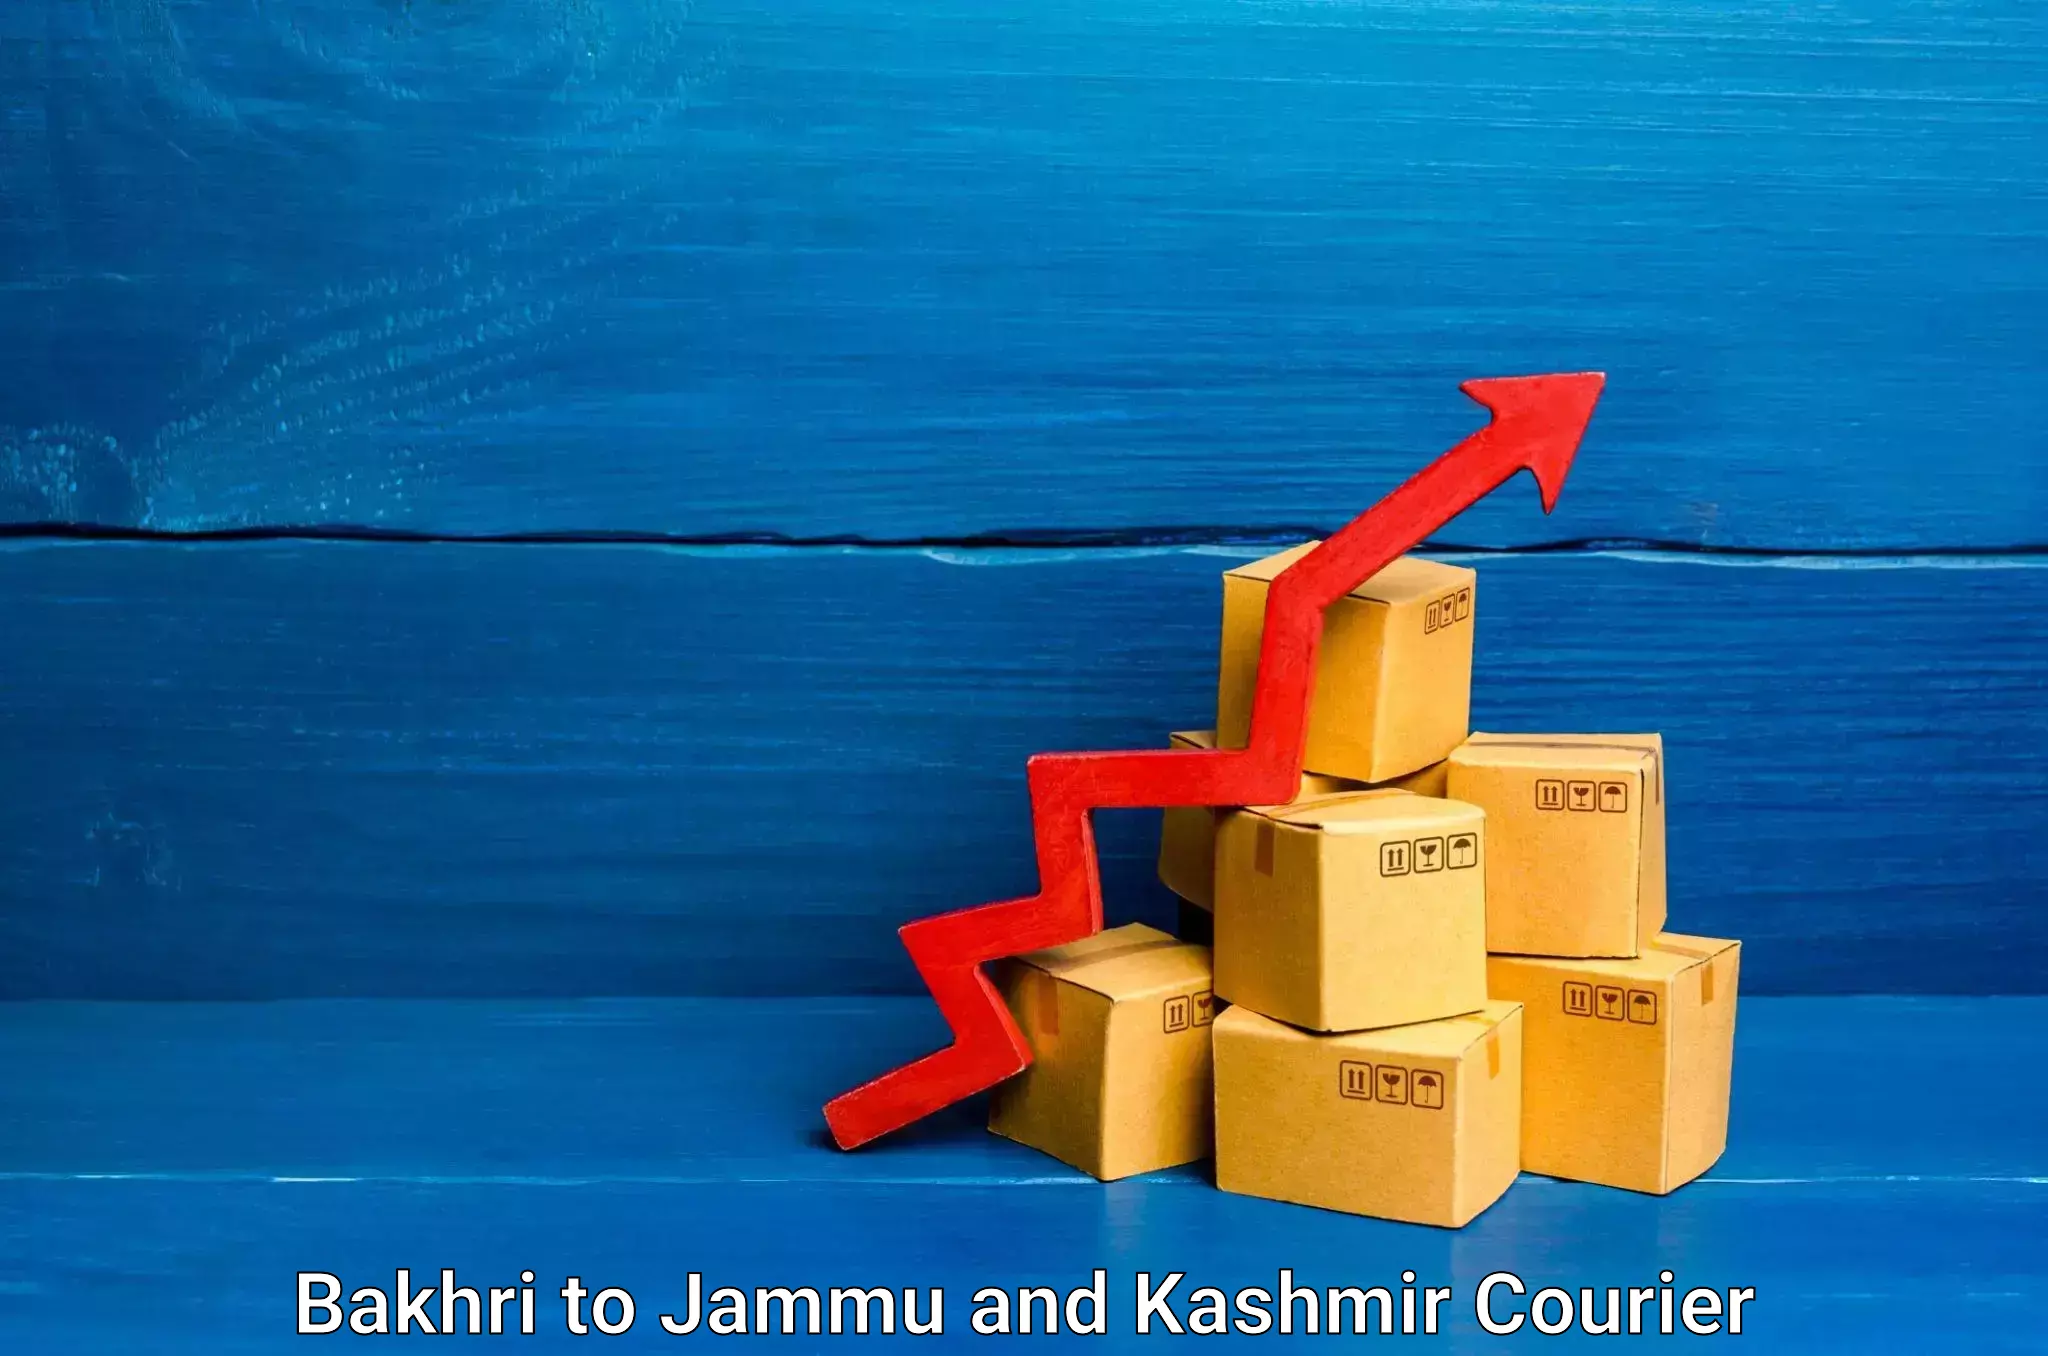 Furniture moving specialists Bakhri to Jammu and Kashmir